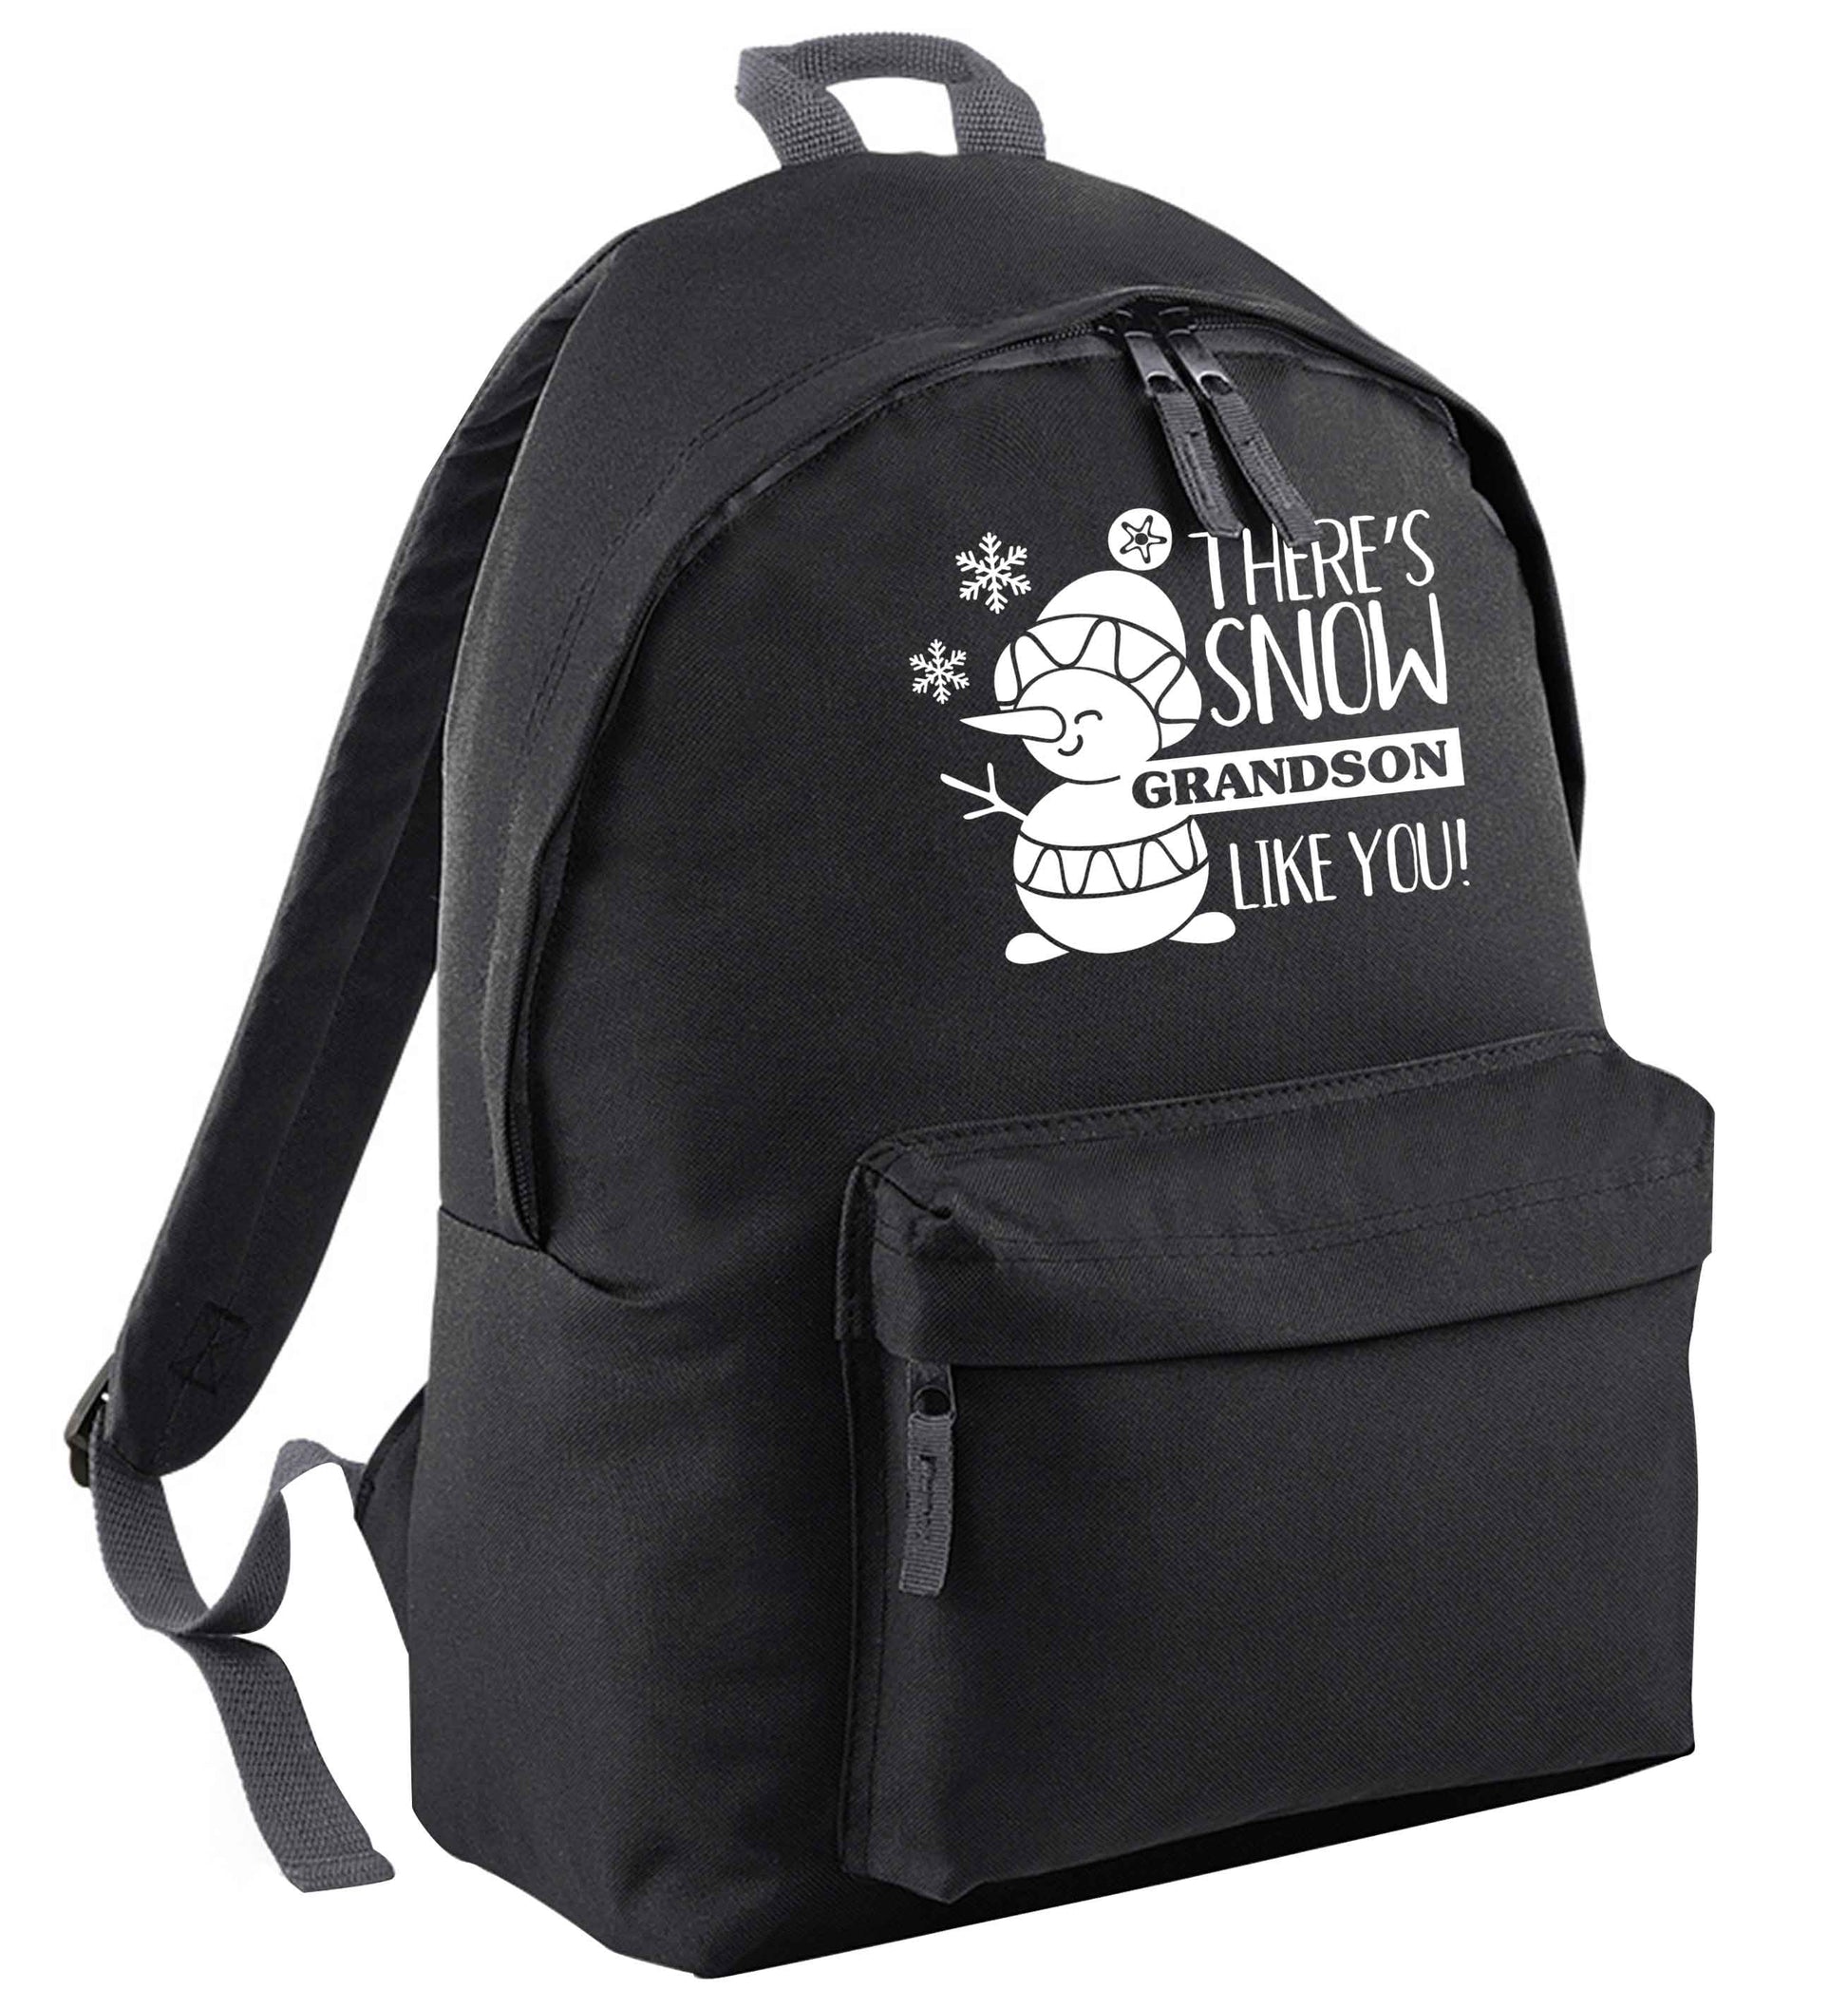 There's snow grandson like you black adults backpack